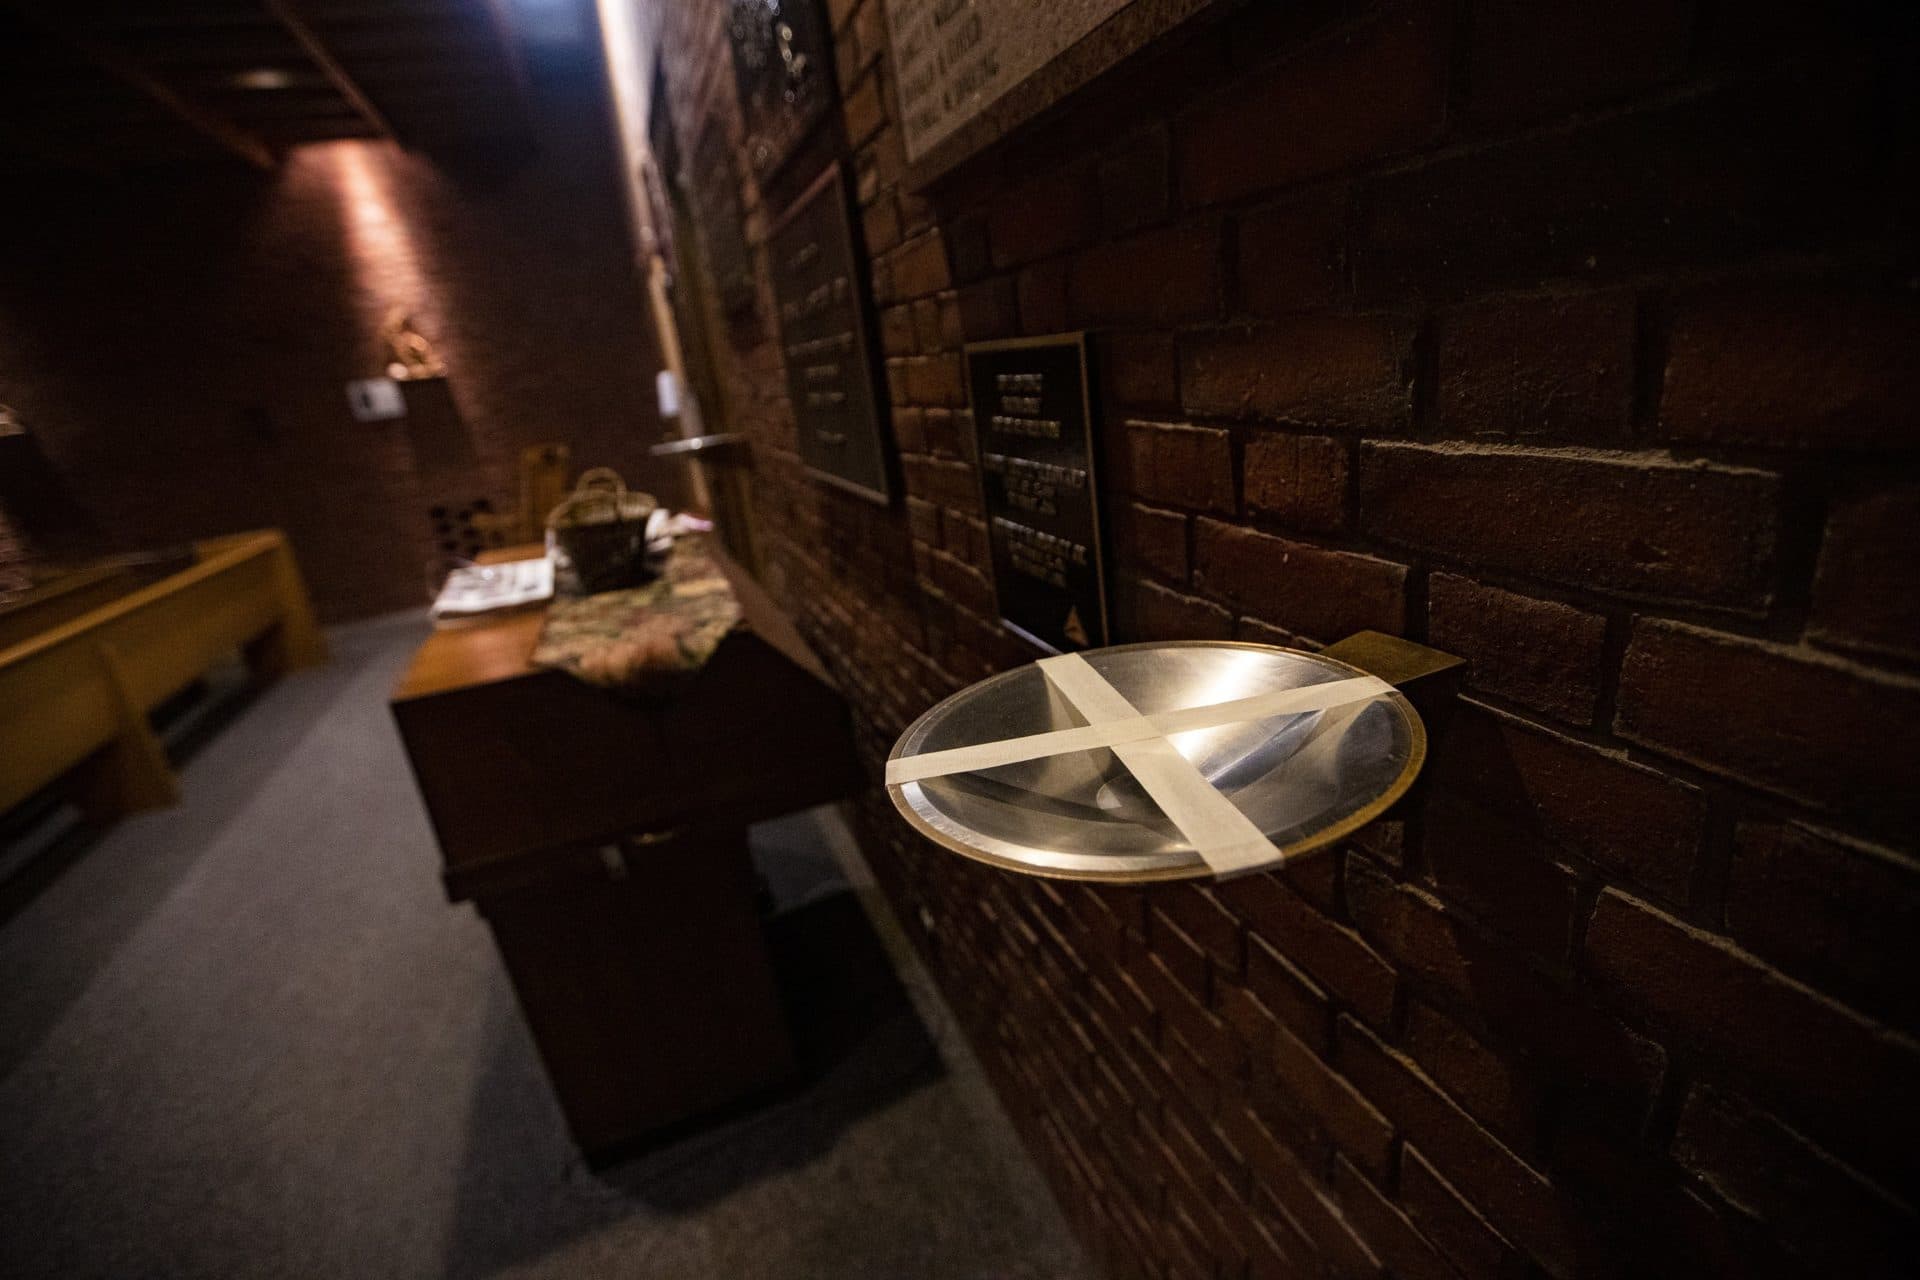 Holy water bowls at the chapel are taped up due to the ongoing coronavirus pandemic. (Jesse Costa/WBUR)